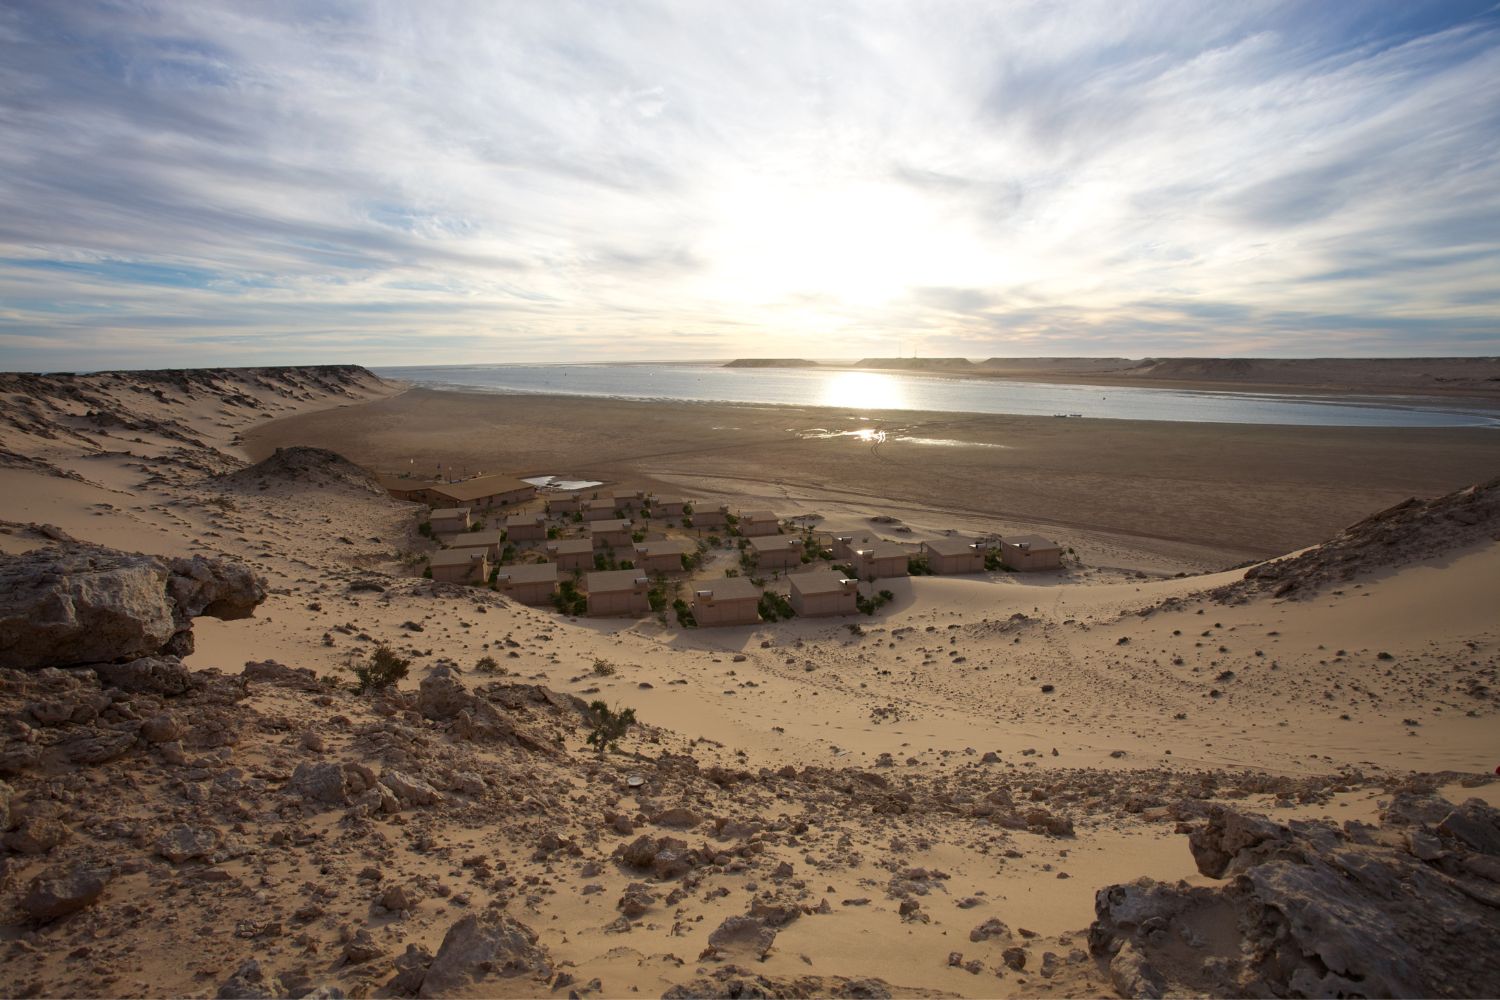 What to Visit in Dakhla